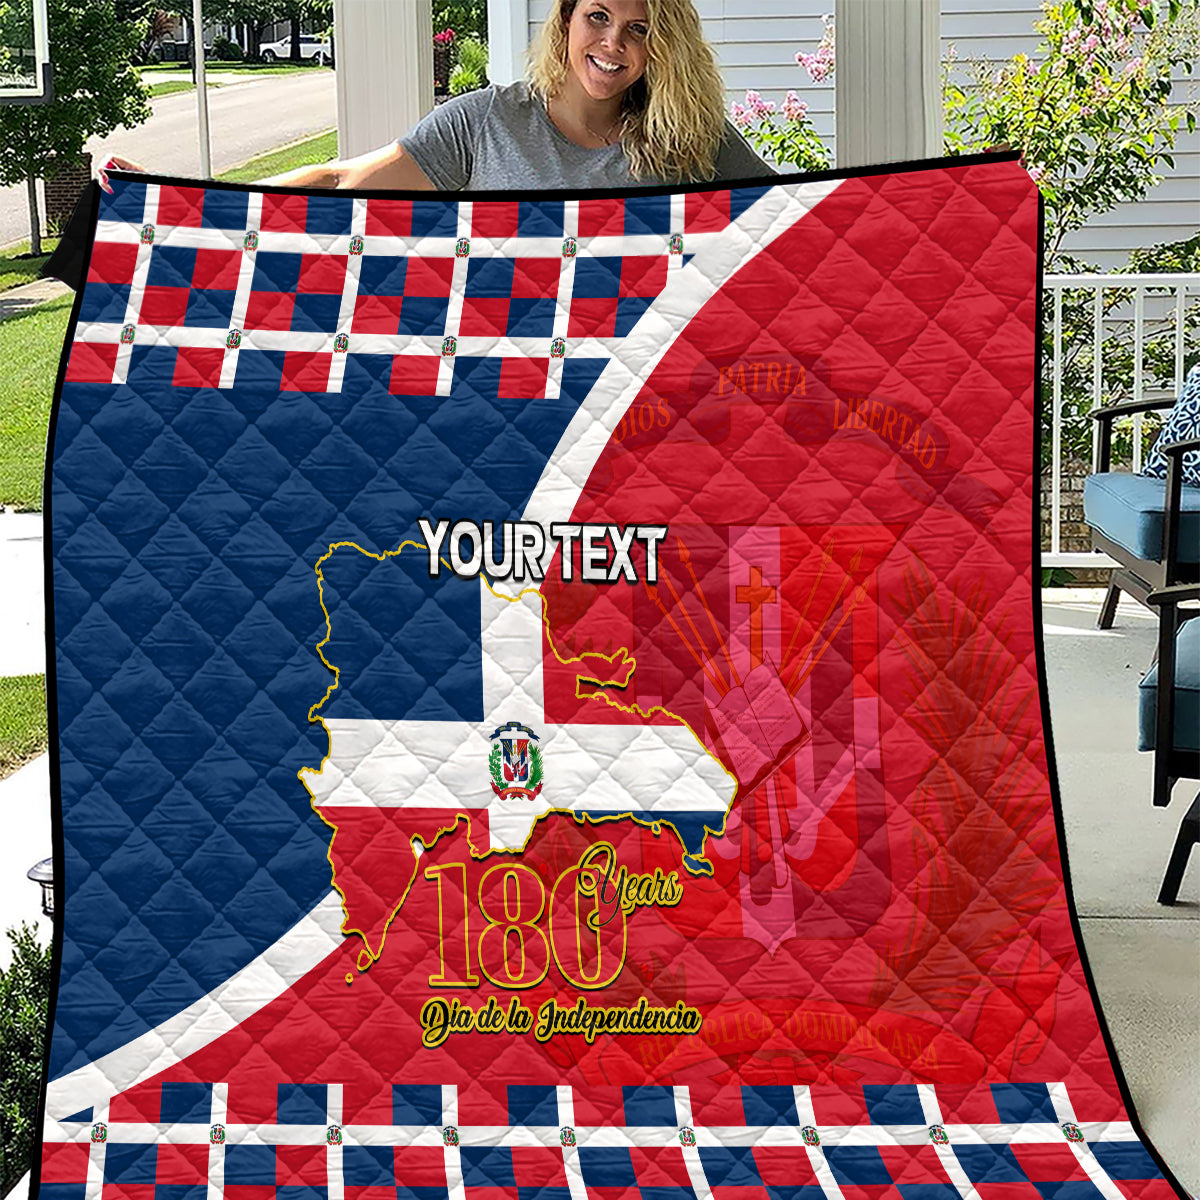 Dominican Republic 180th Years Independence Day Personalized Quilt